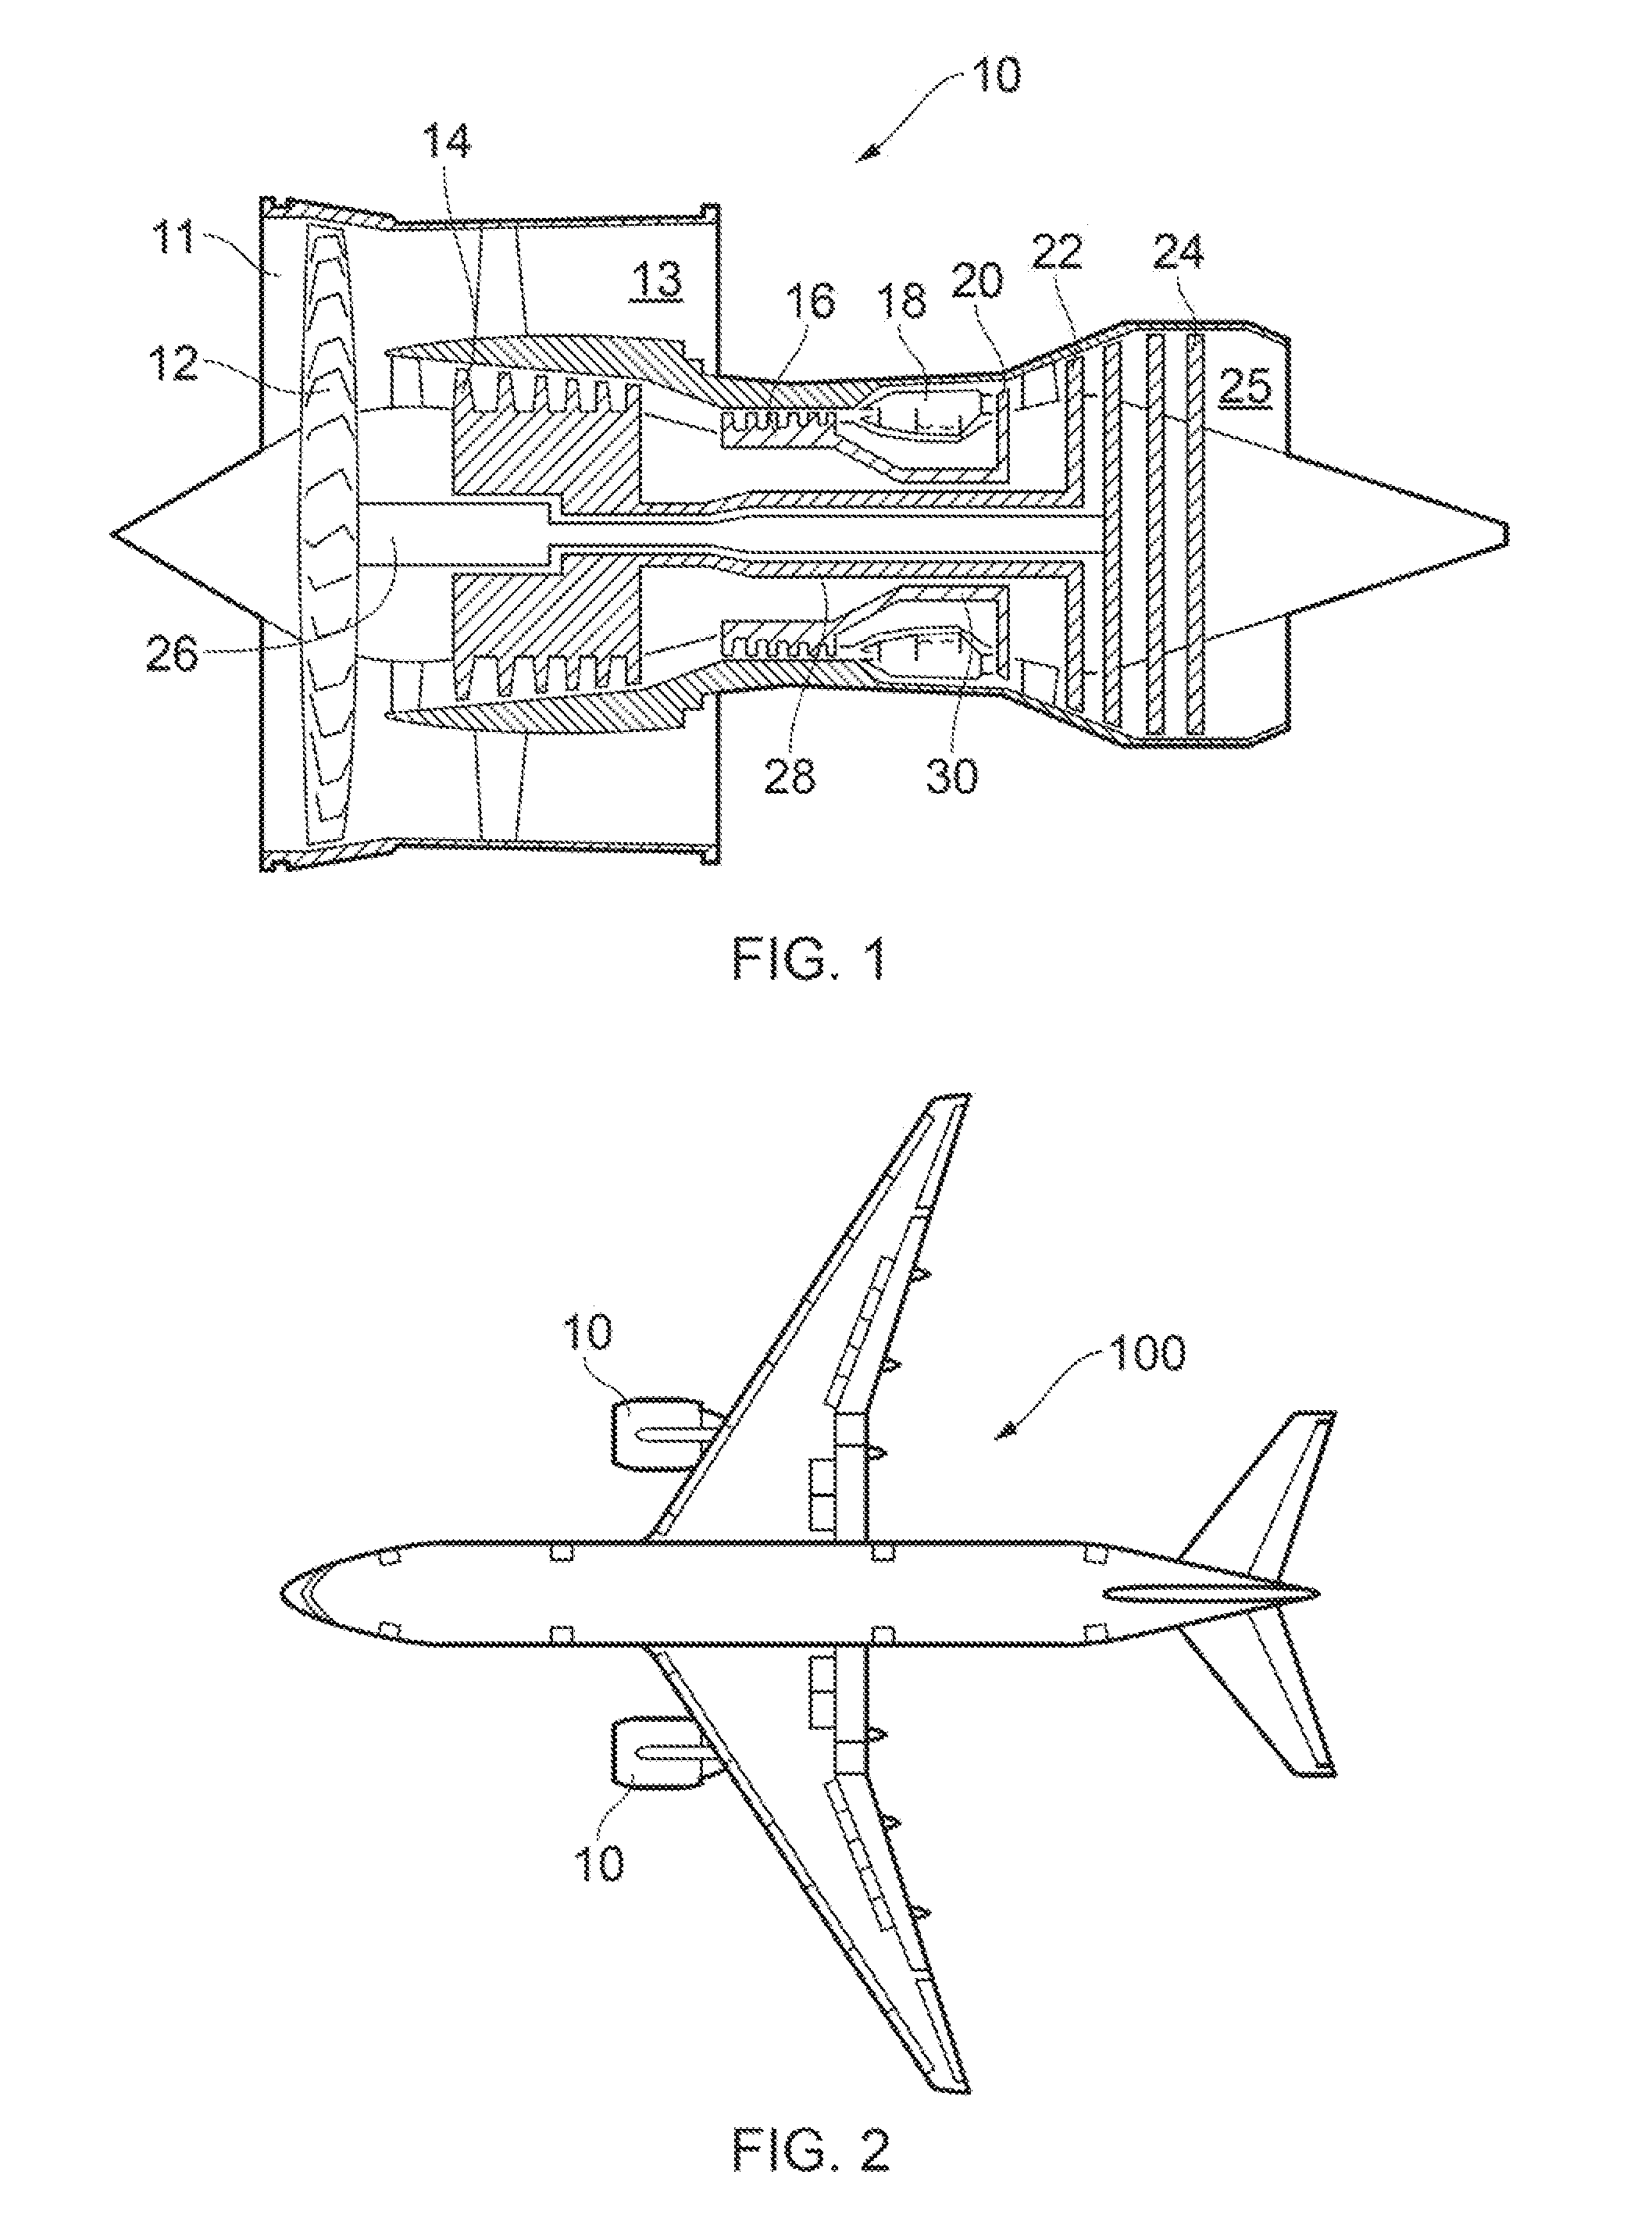 Pnuematic system for an aircraft